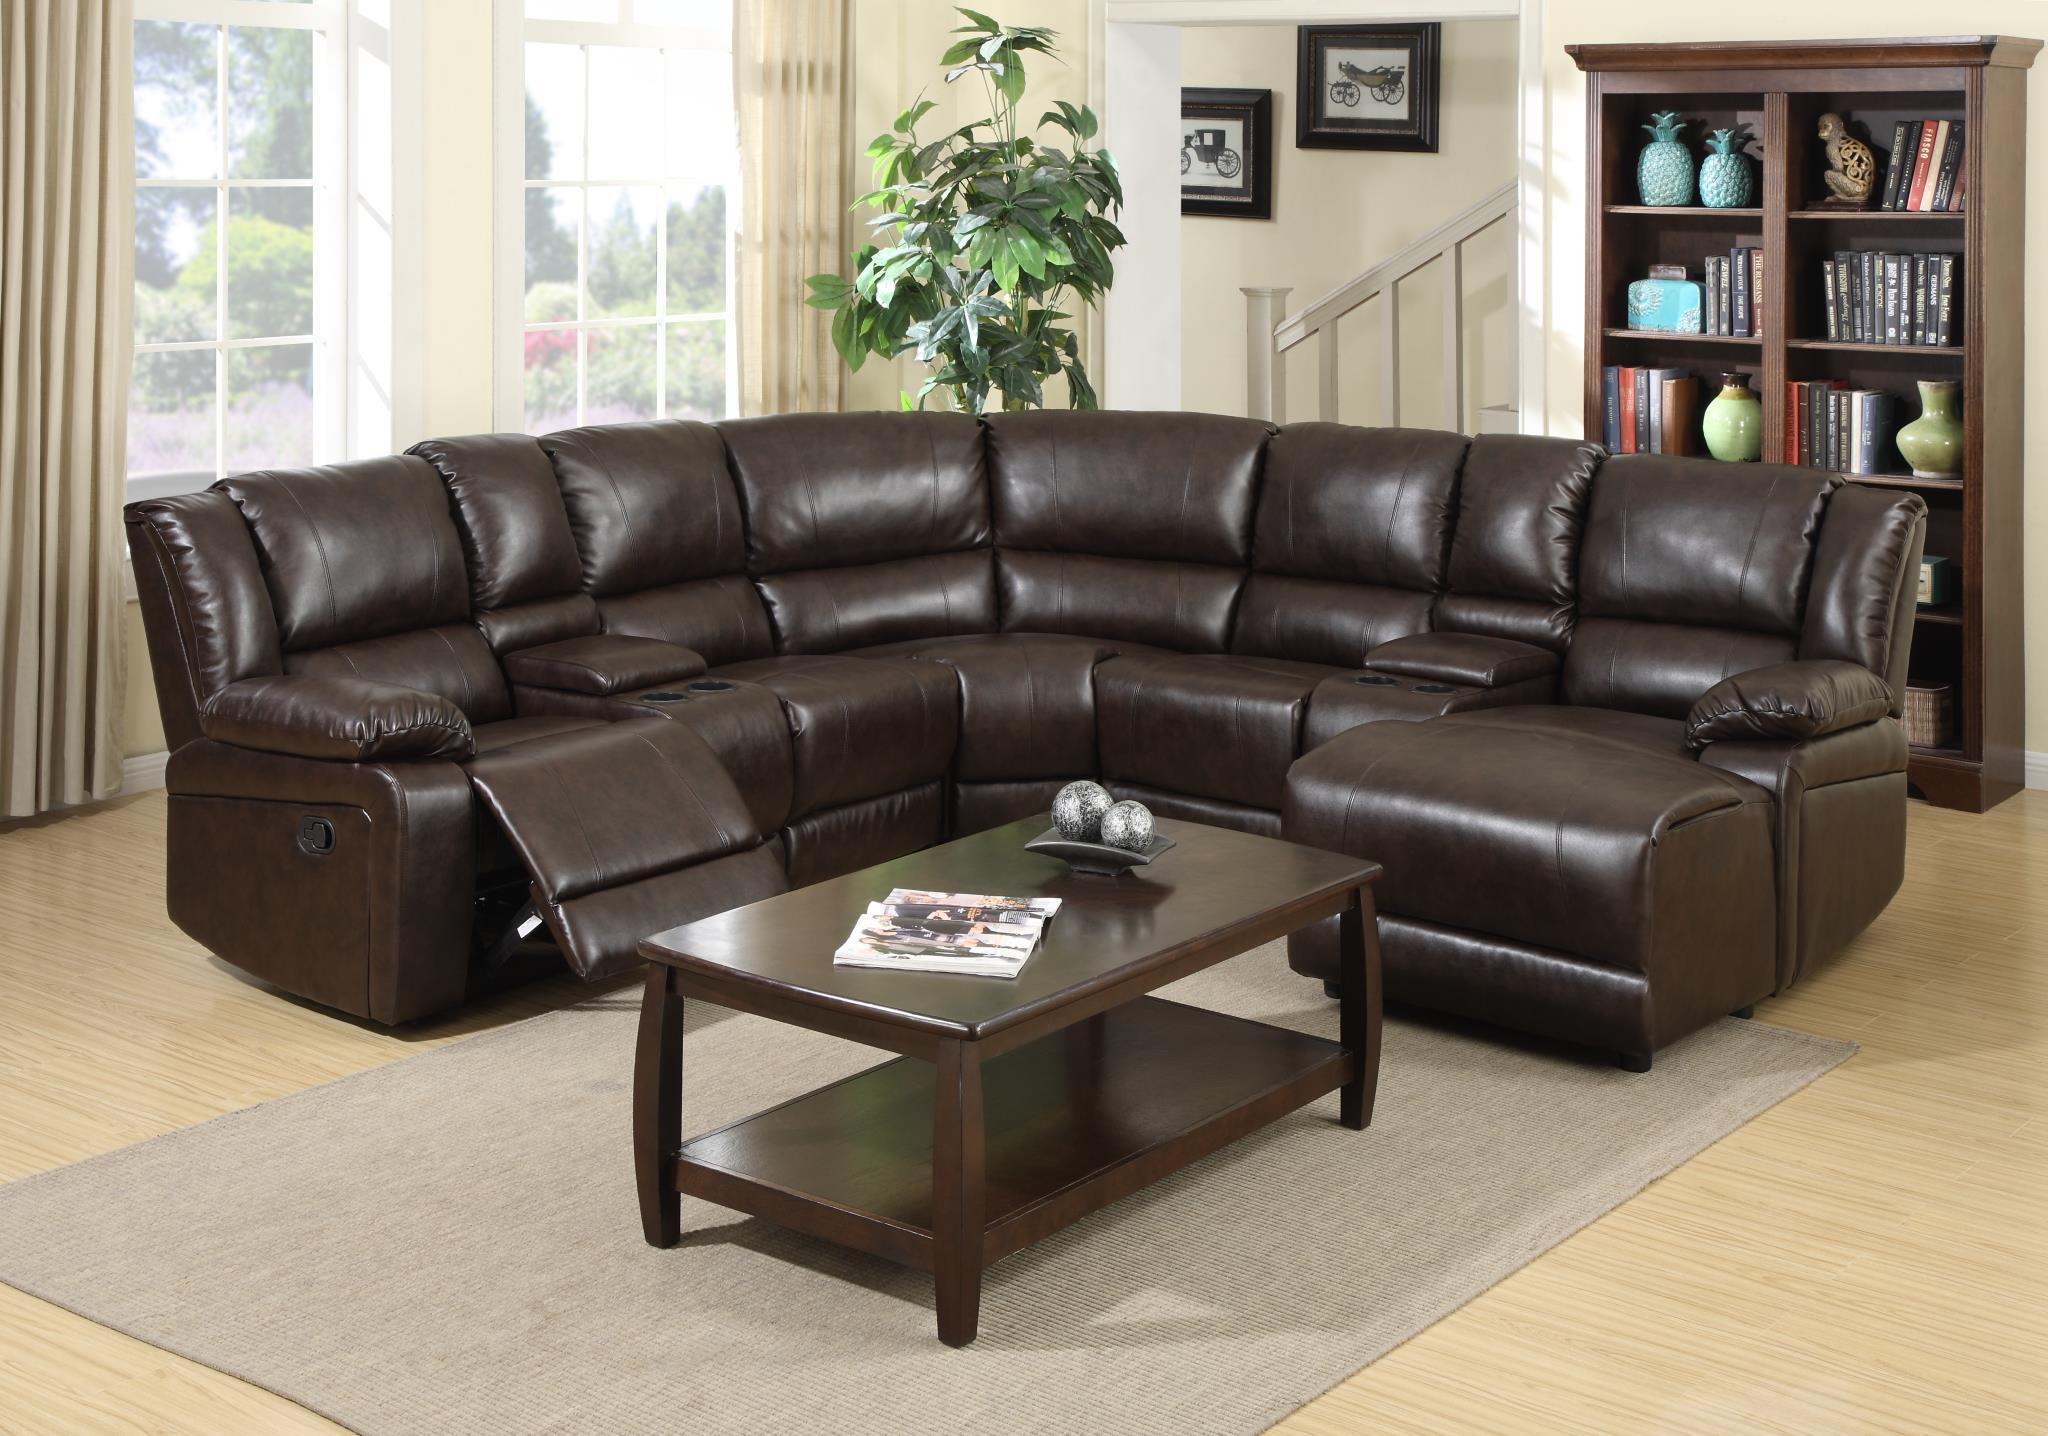 Traditional Sectional Sofa Cadence 1090-BRN in Brown Leatherette